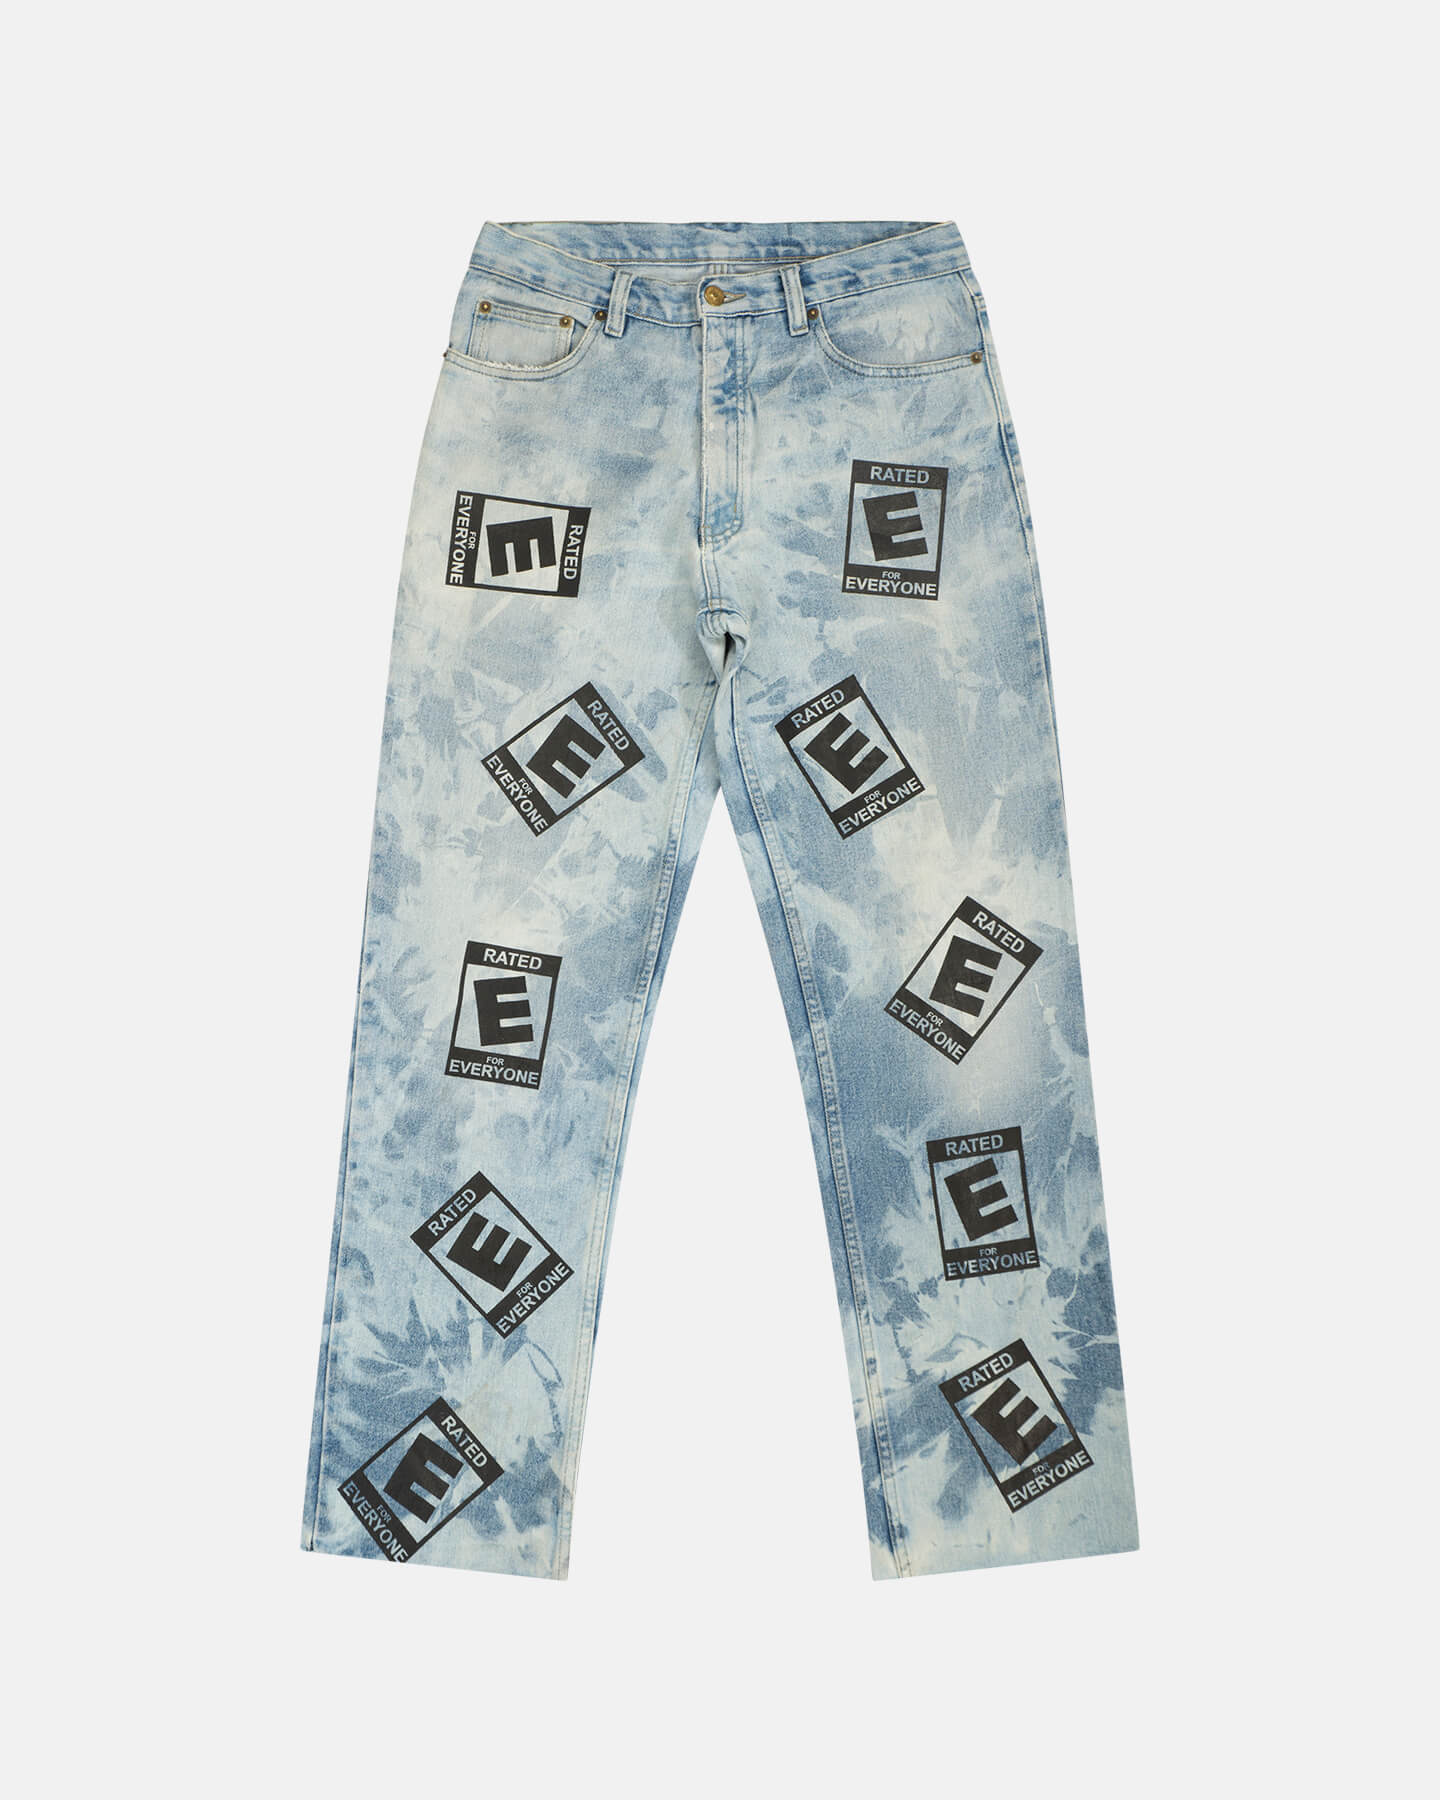 DB [E for Everyone] Decolorized Denim in Blue